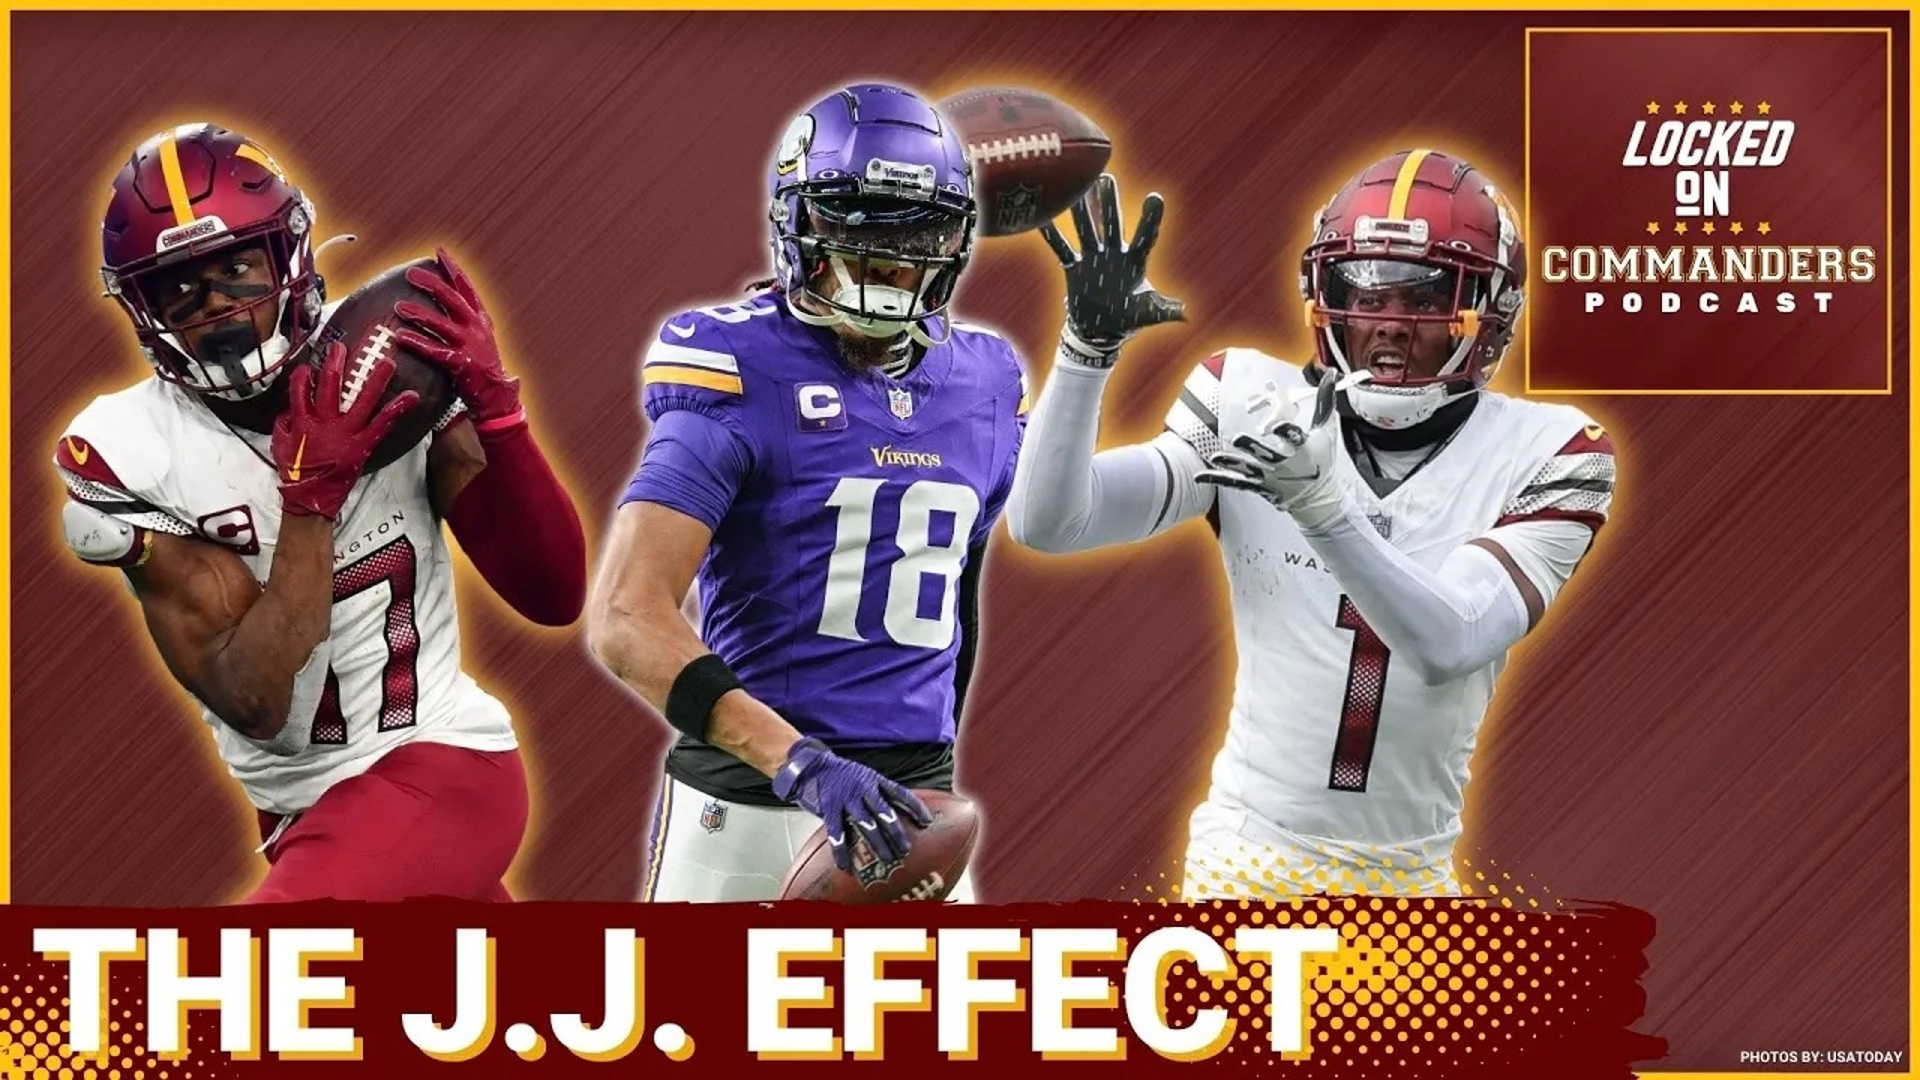 Looking at how Justin Jefferson's new contract with the Minnesota Vikings could impact the future of the Washington Commanders.